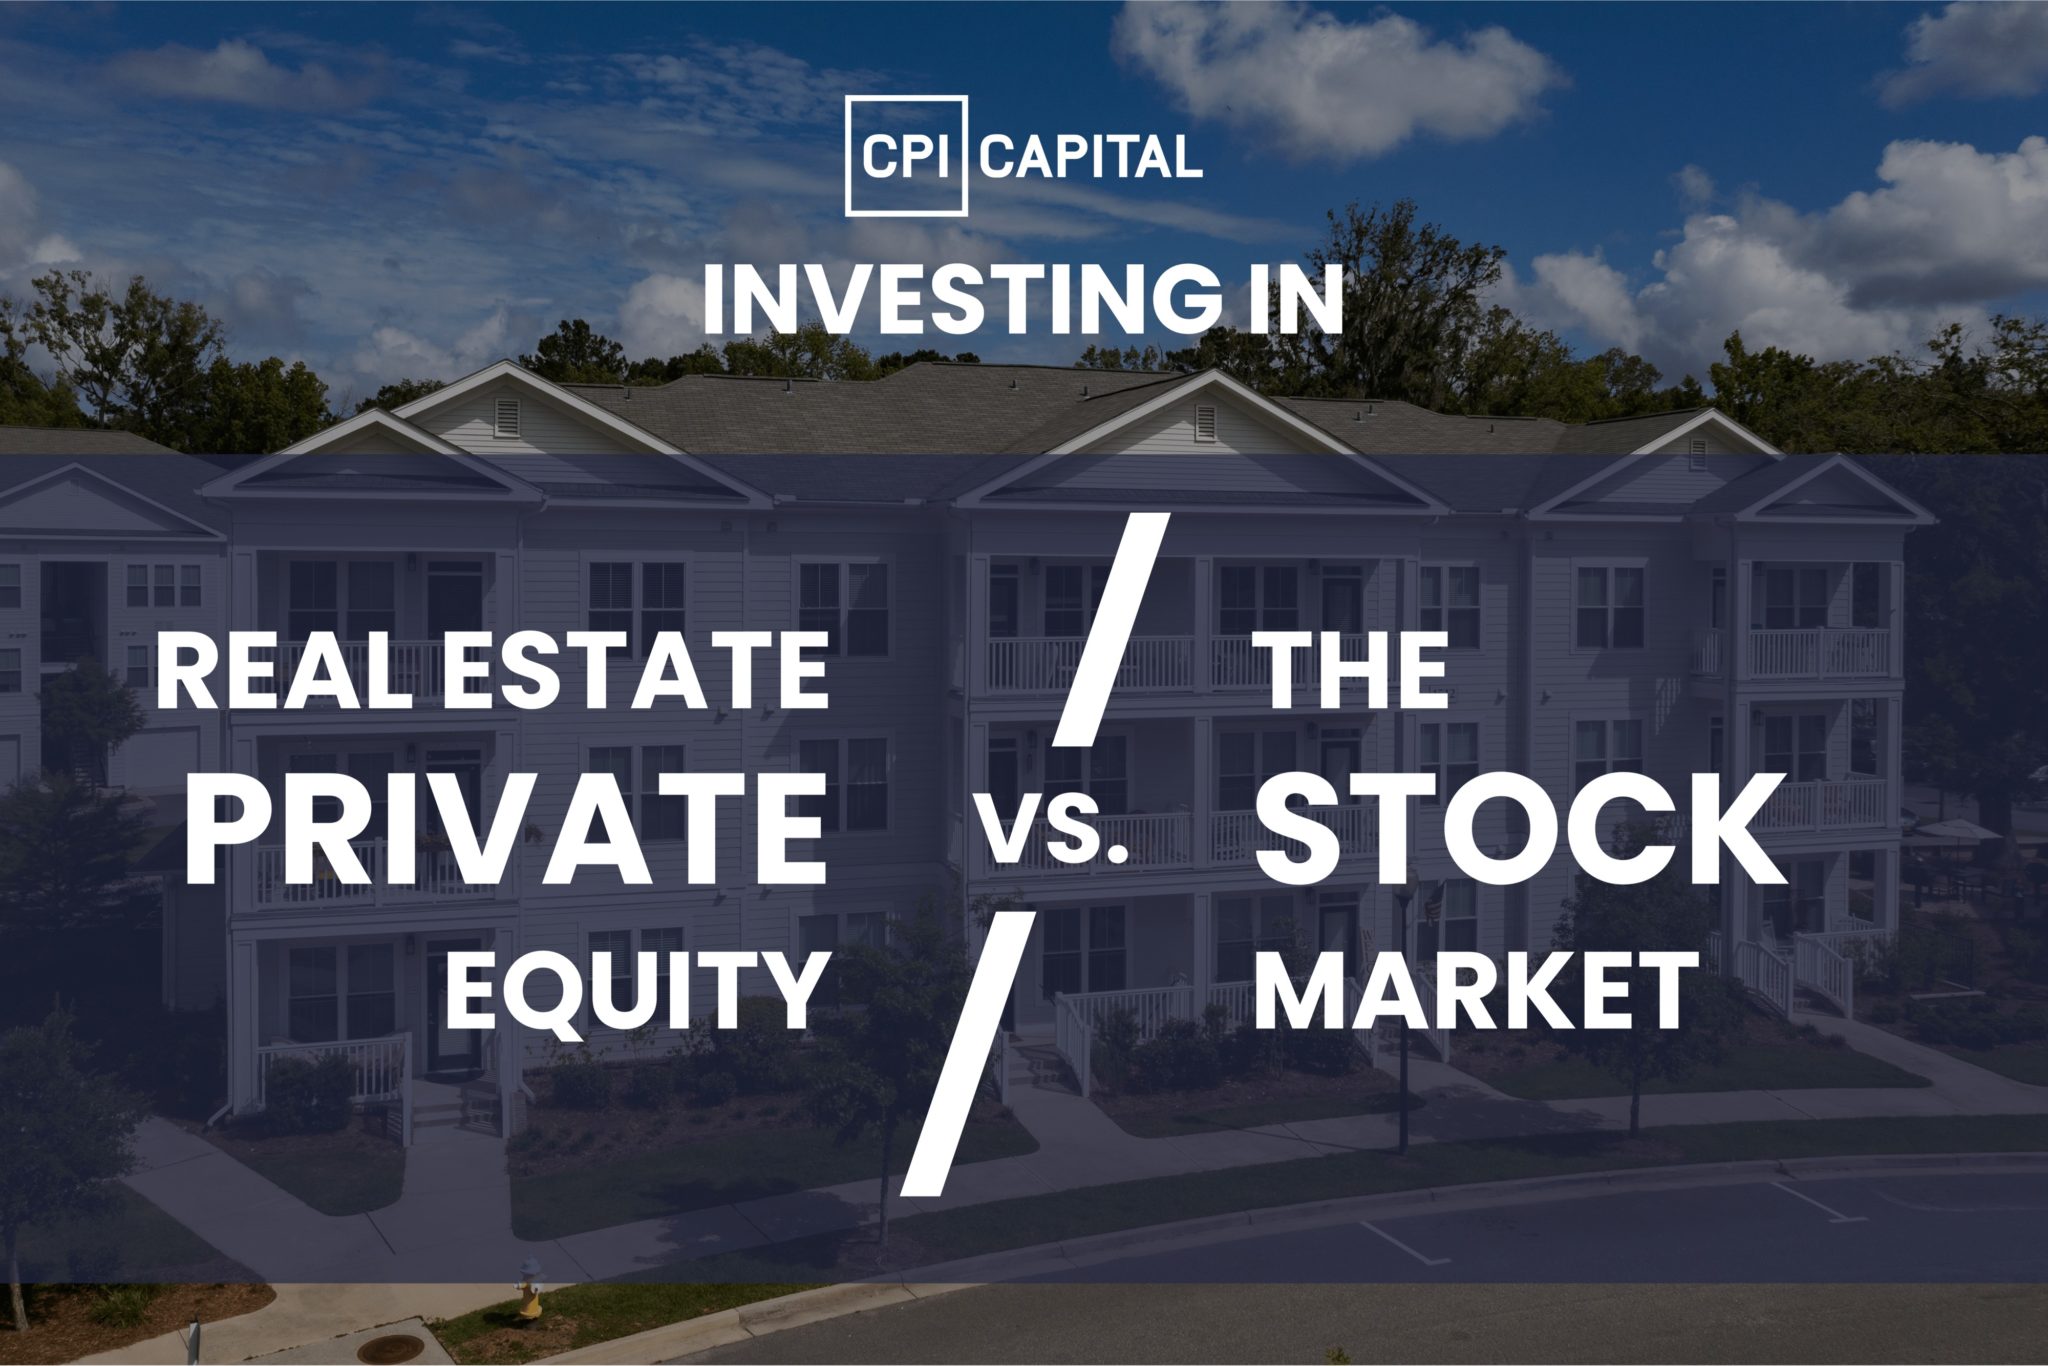 Investing in Real Estate Private Equity vs the Stock Market